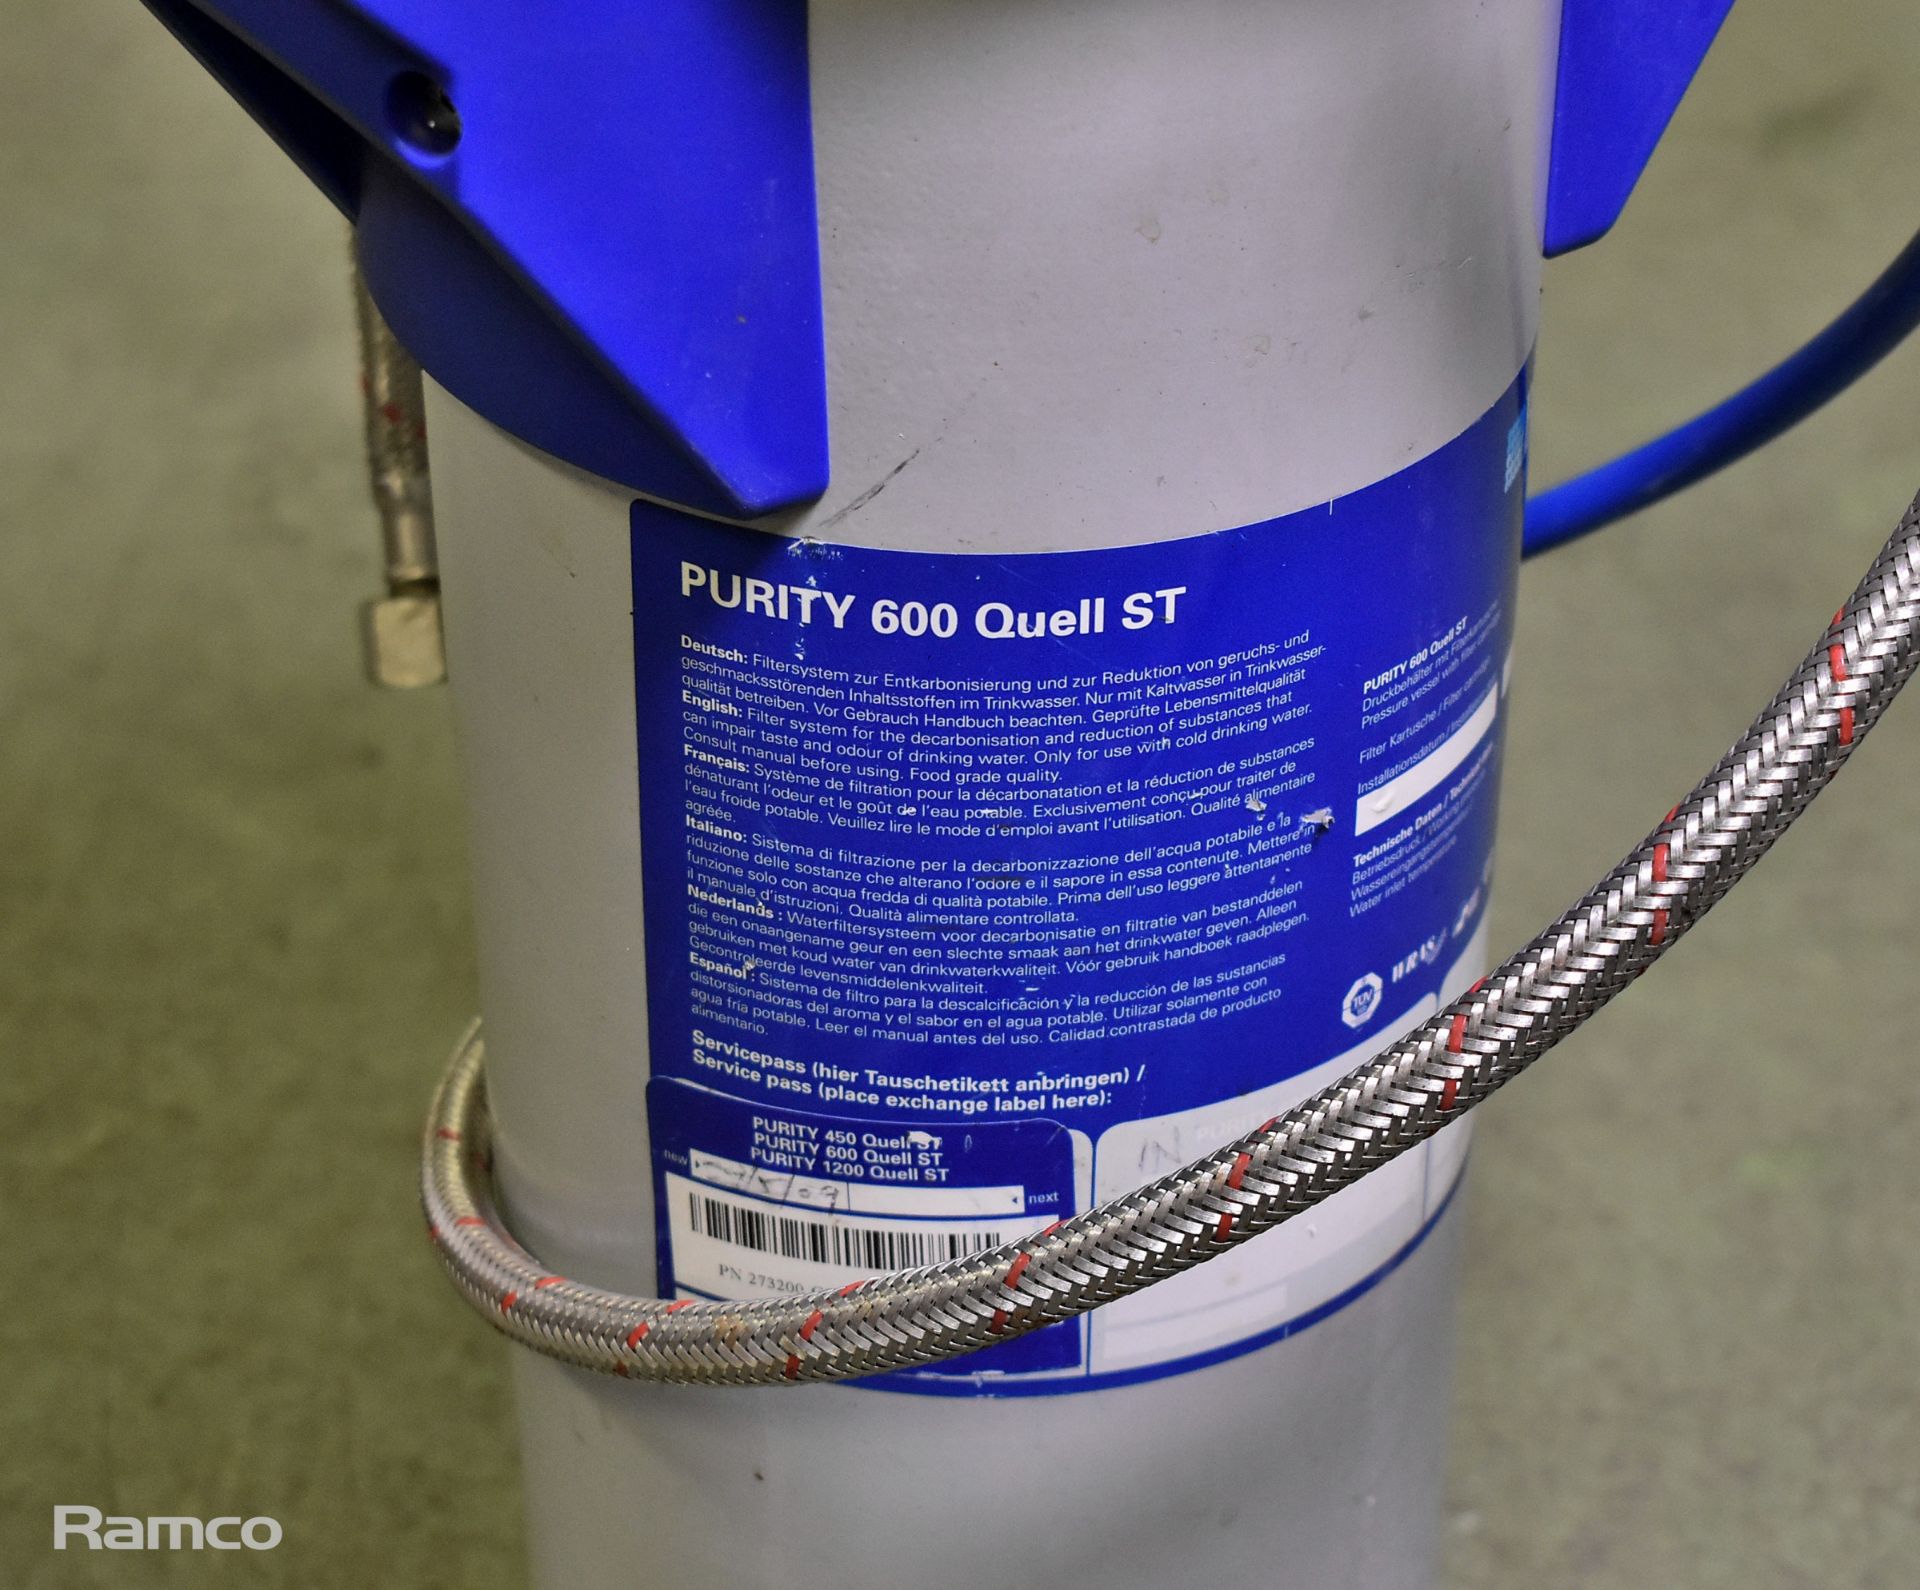 Brita Purity 600 Quell ST filter cartridge - Image 3 of 3